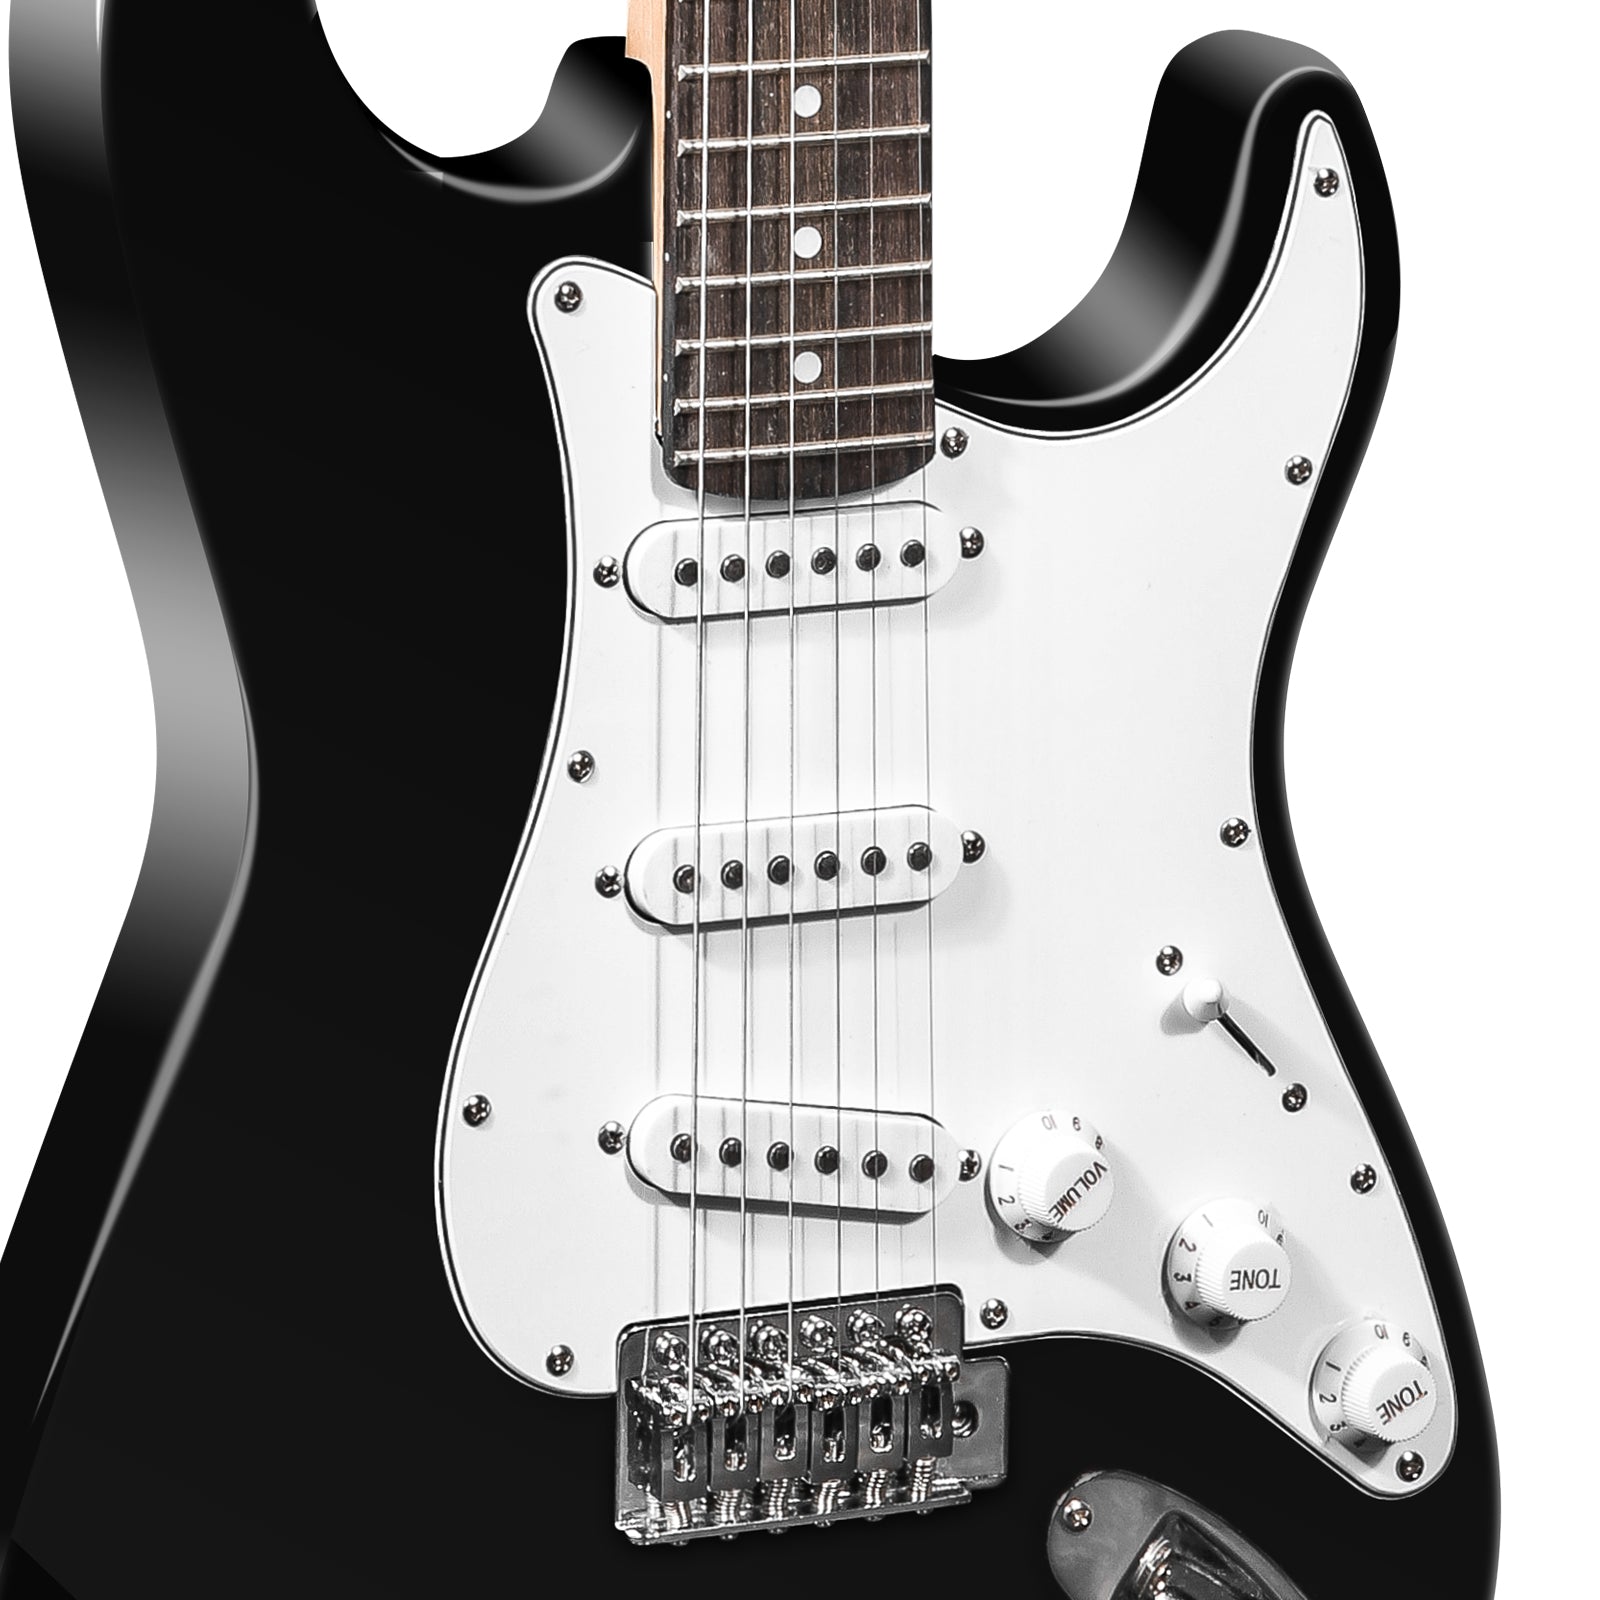 39.5" Full Size Electric Guitar for Beginners with Amplifier, Black and White - Luckyermore